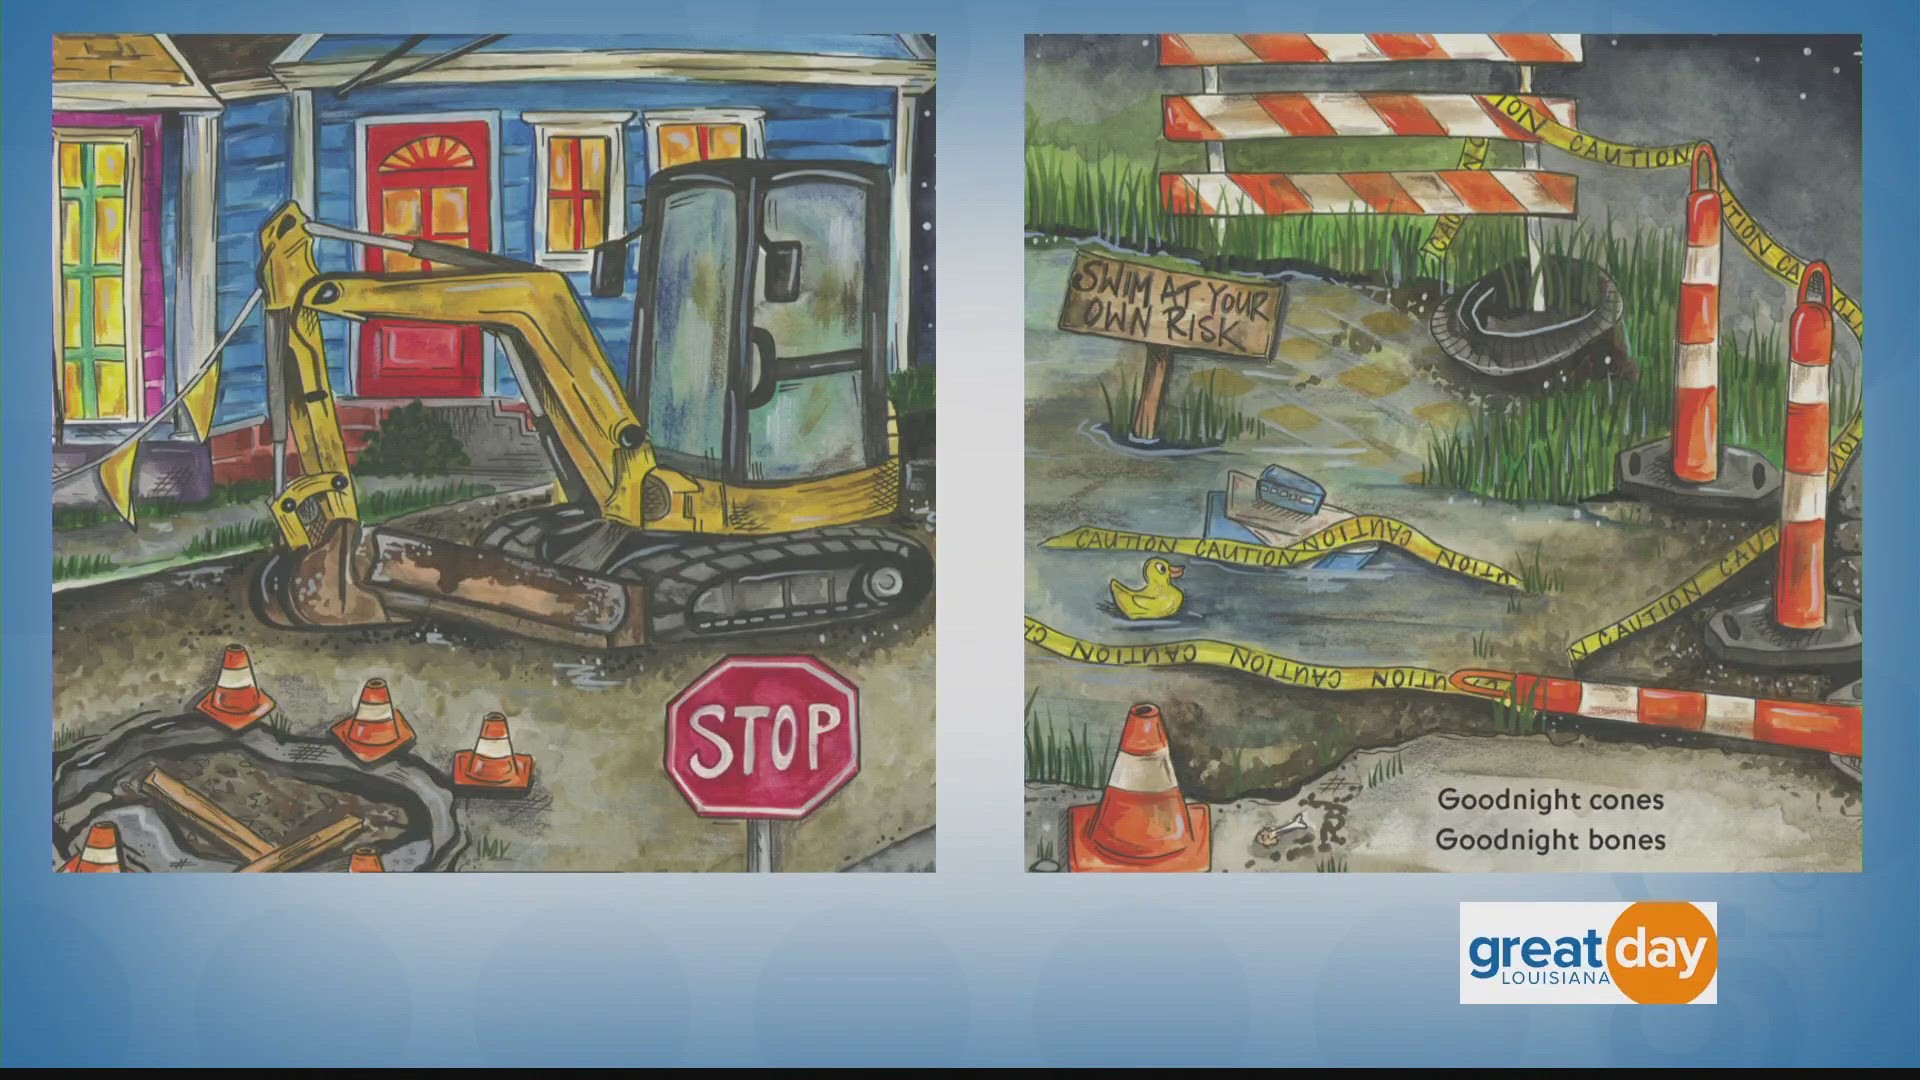 The author of "Goodnight Pothole" stops by to talk about this fun book that kids and adults will enjoy.